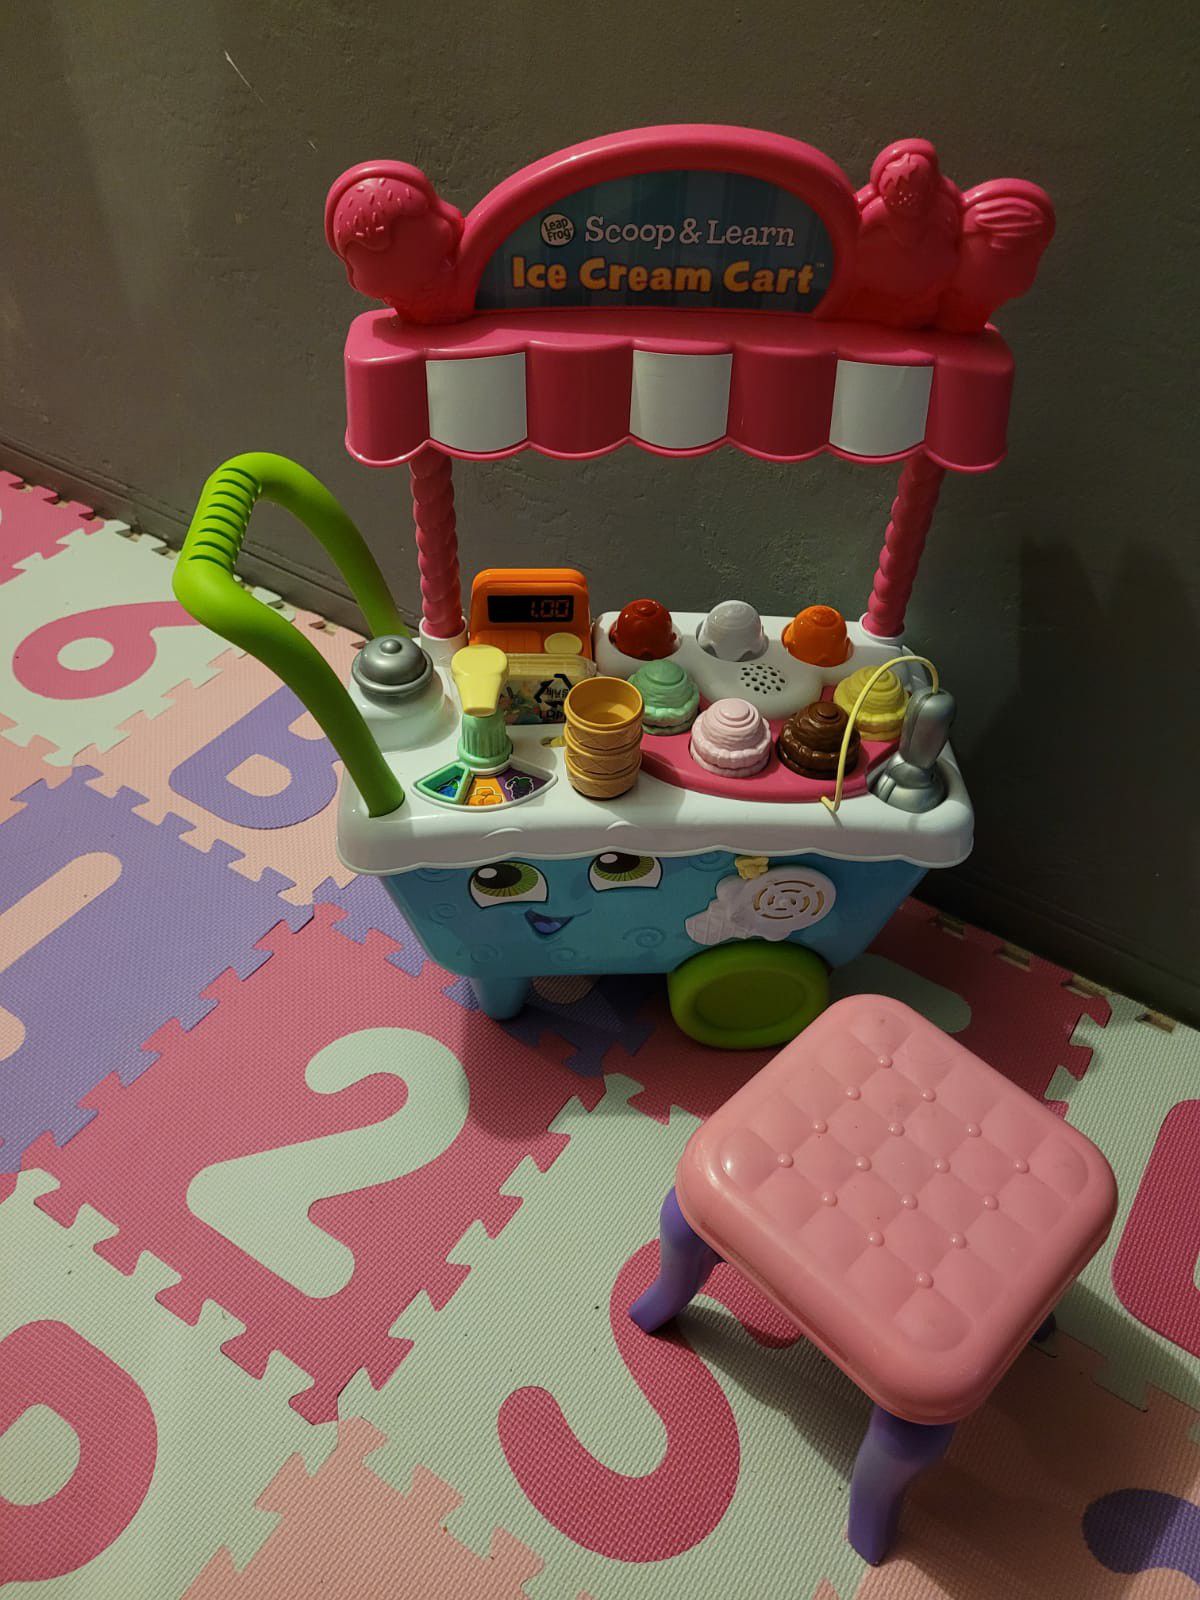 ICE CREAM CART AND A BABY CHAIR